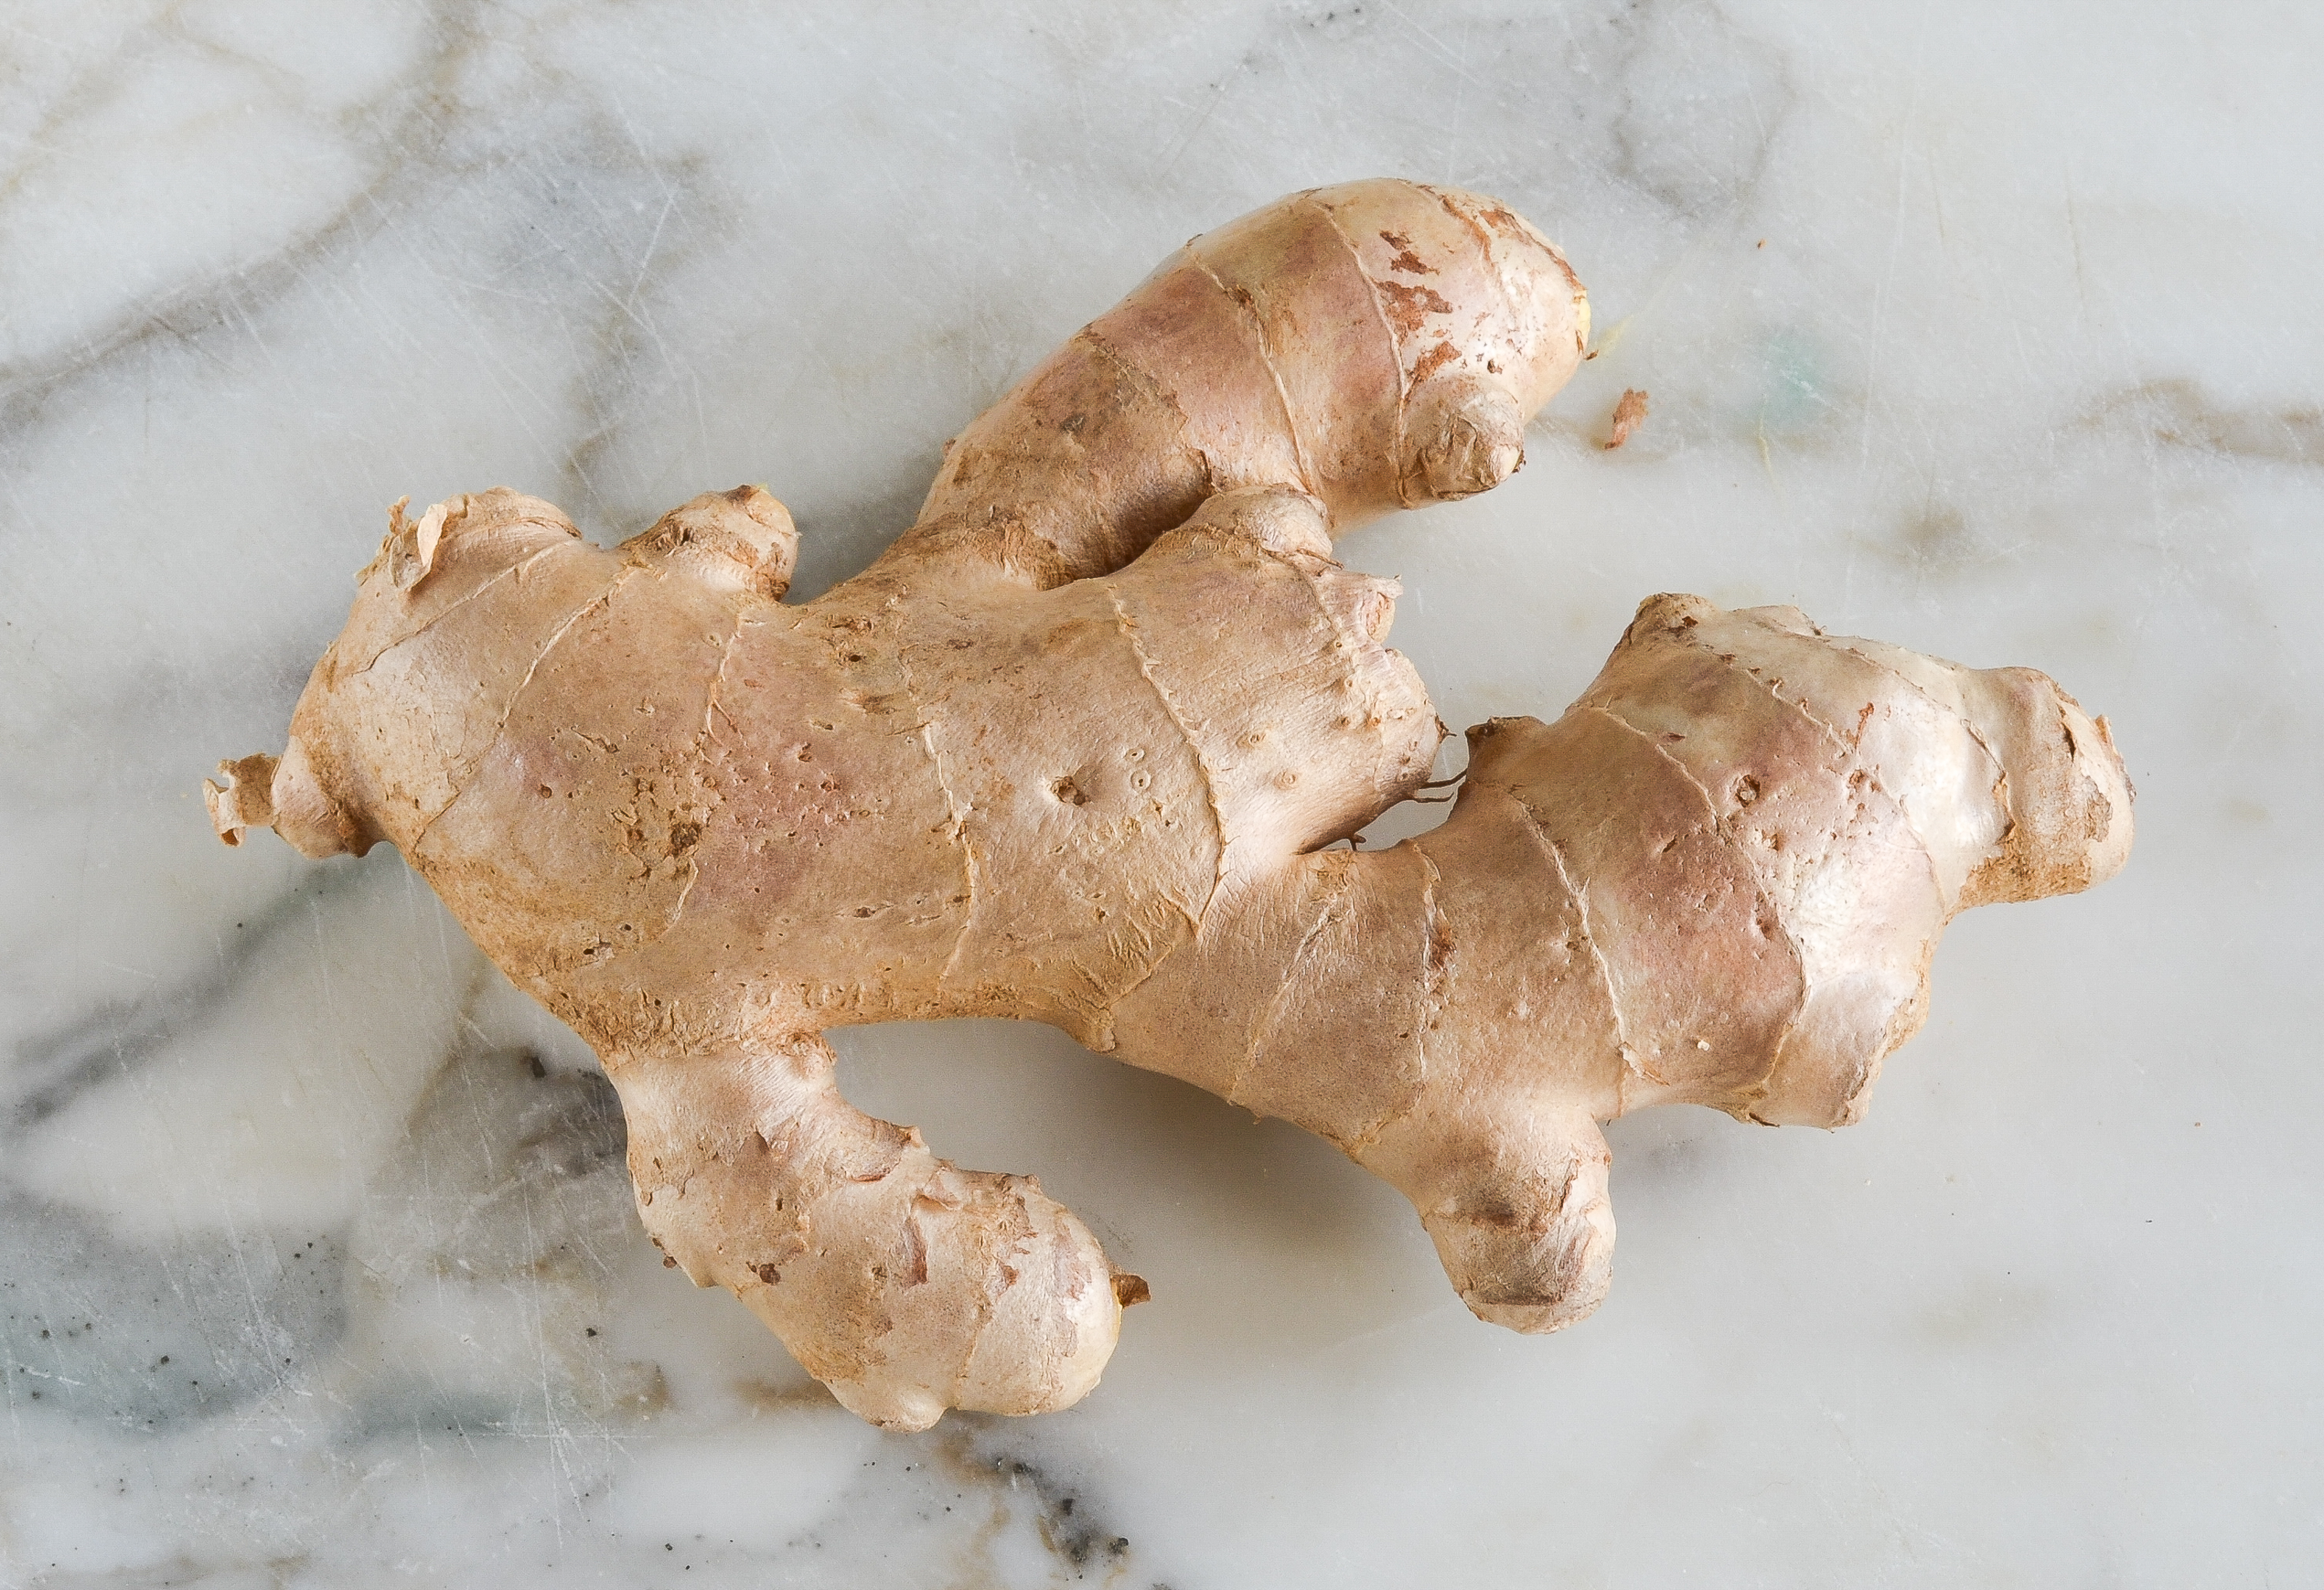 https://www.onceuponachef.com/images/2019/09/How-to-Grate-and-Chop-Ginger.jpg